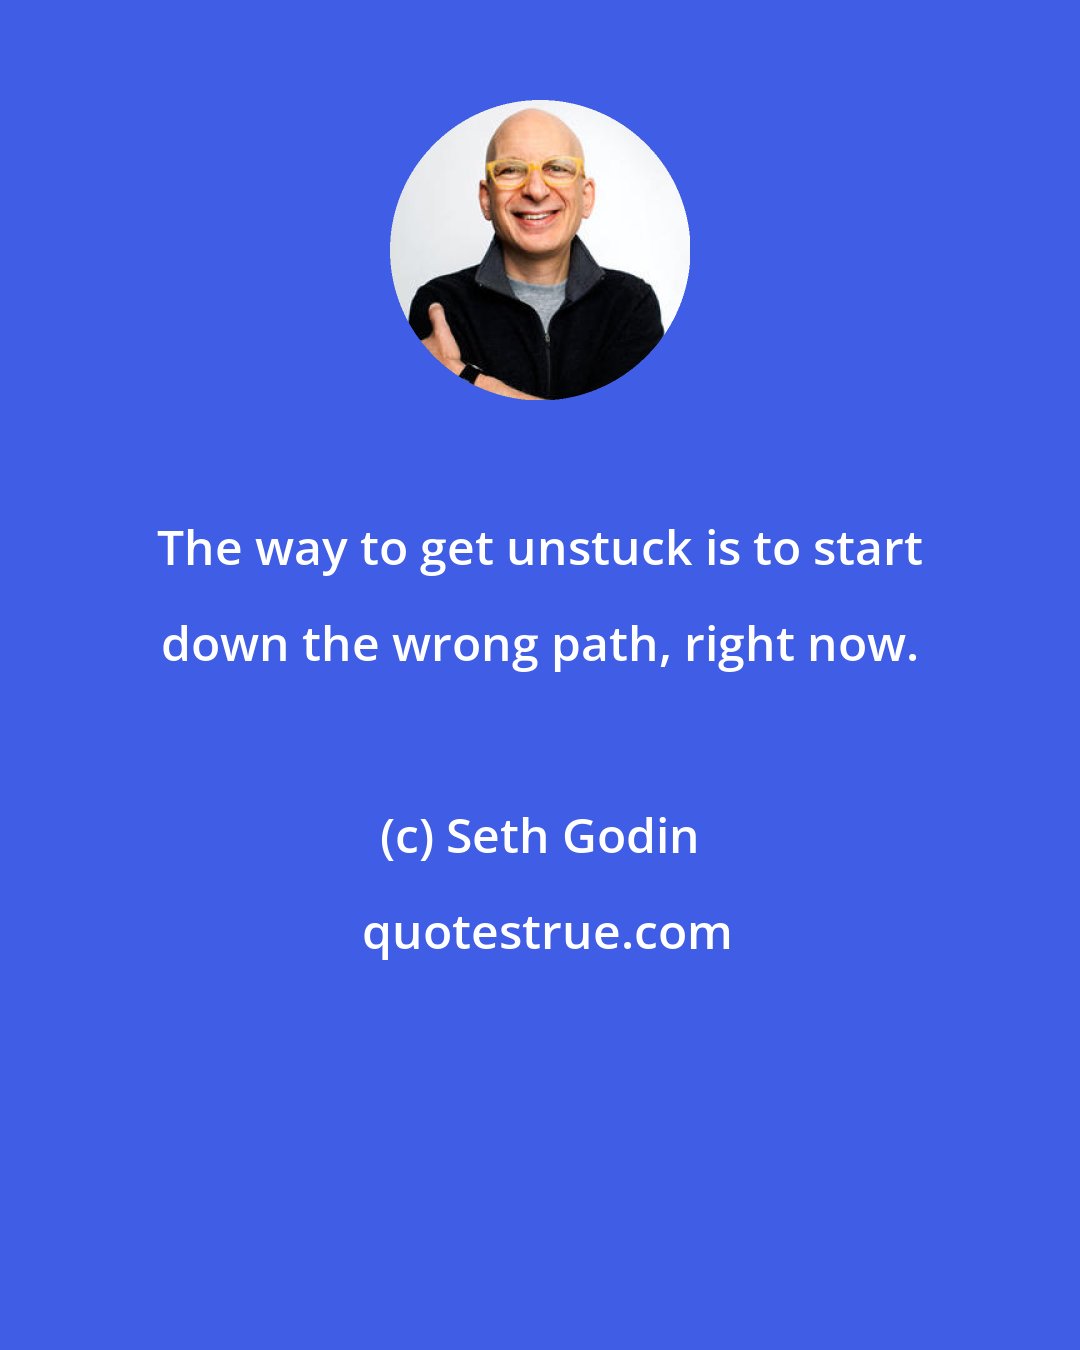 Seth Godin: The way to get unstuck is to start down the wrong path, right now.